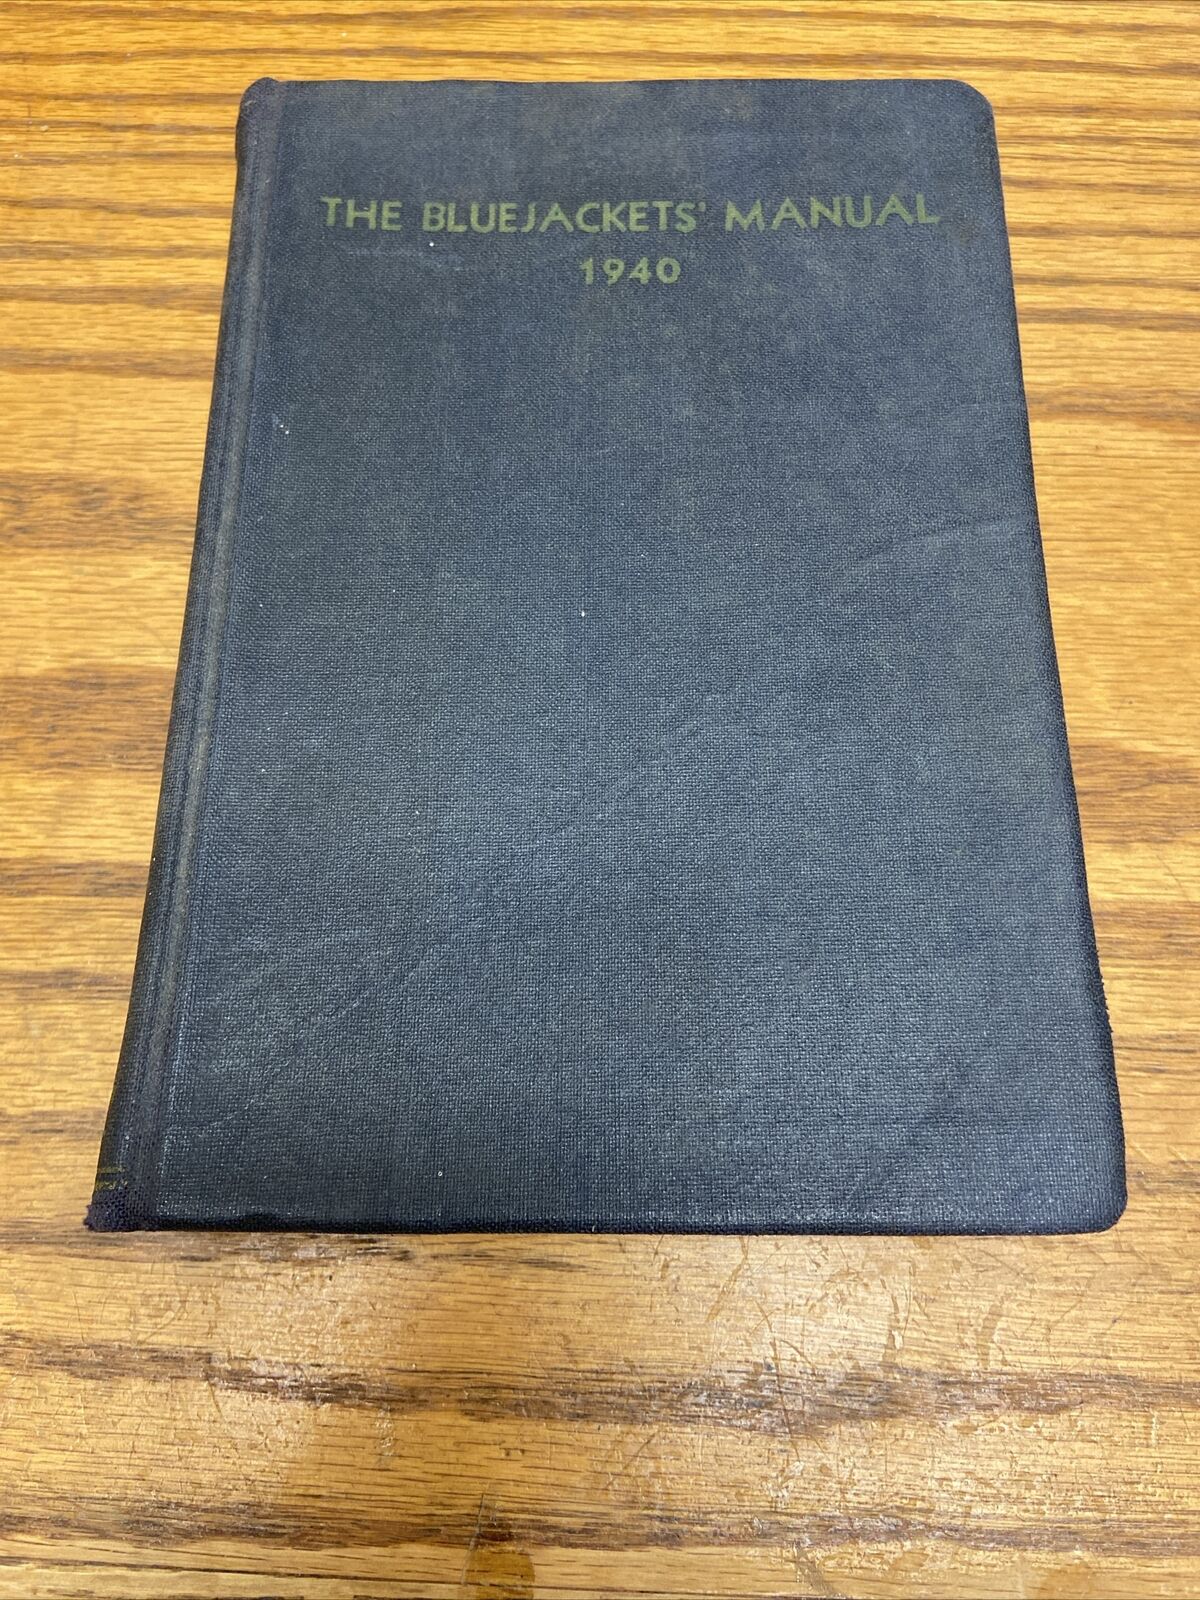 The Bluejackets' Manual US Navy 1940 Tenth Edition Naval Institute Vintage Book